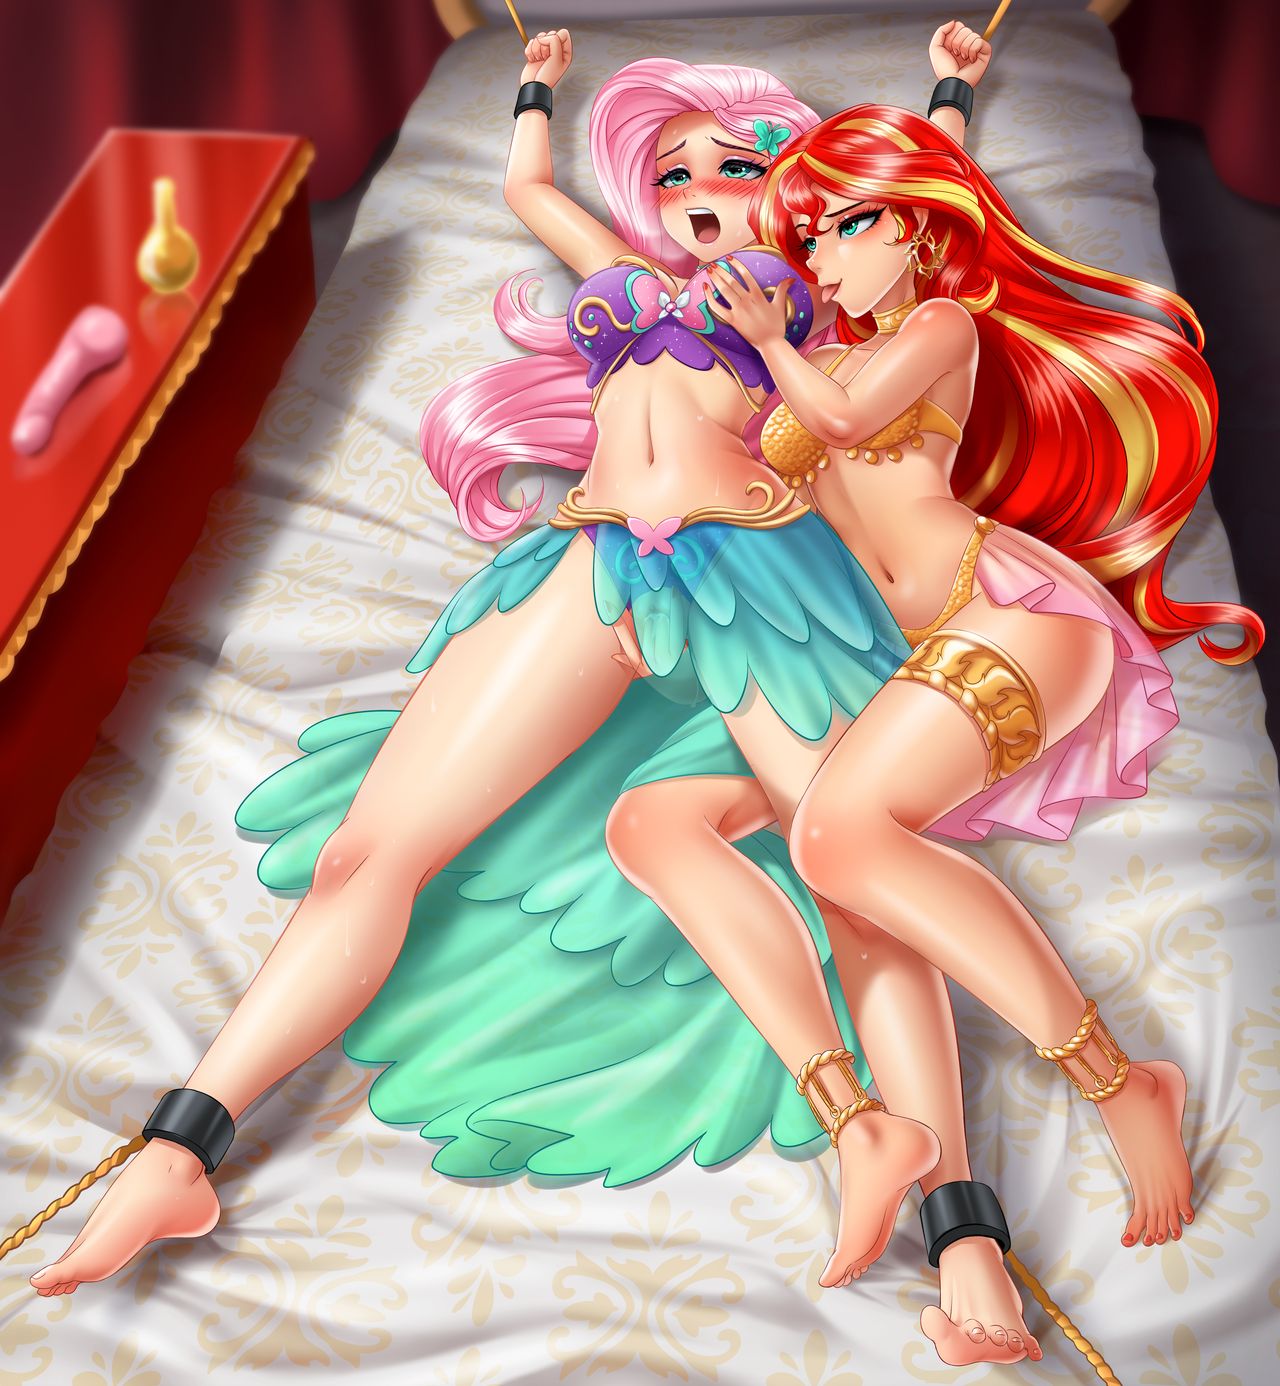 2_girls 2girls aqua_eyes bdsm bed bed_sheet bedroom bedroom_eyes blush bra breast_grab breasts dildo equestria_girls fair_skin female/female female_only fingering fingers_in_pussy fluttershy fluttershy_(mlp) friendship_is_magic grin hair_ornament hairless_pussy humanized long_hair mostly_nude my_little_pony open_mouth pink_hair pussy_juice red_hair sex_slave sex_toy sunset_shimmer sunset_shimmer_(eg) sweat tied_up two-tone_hair